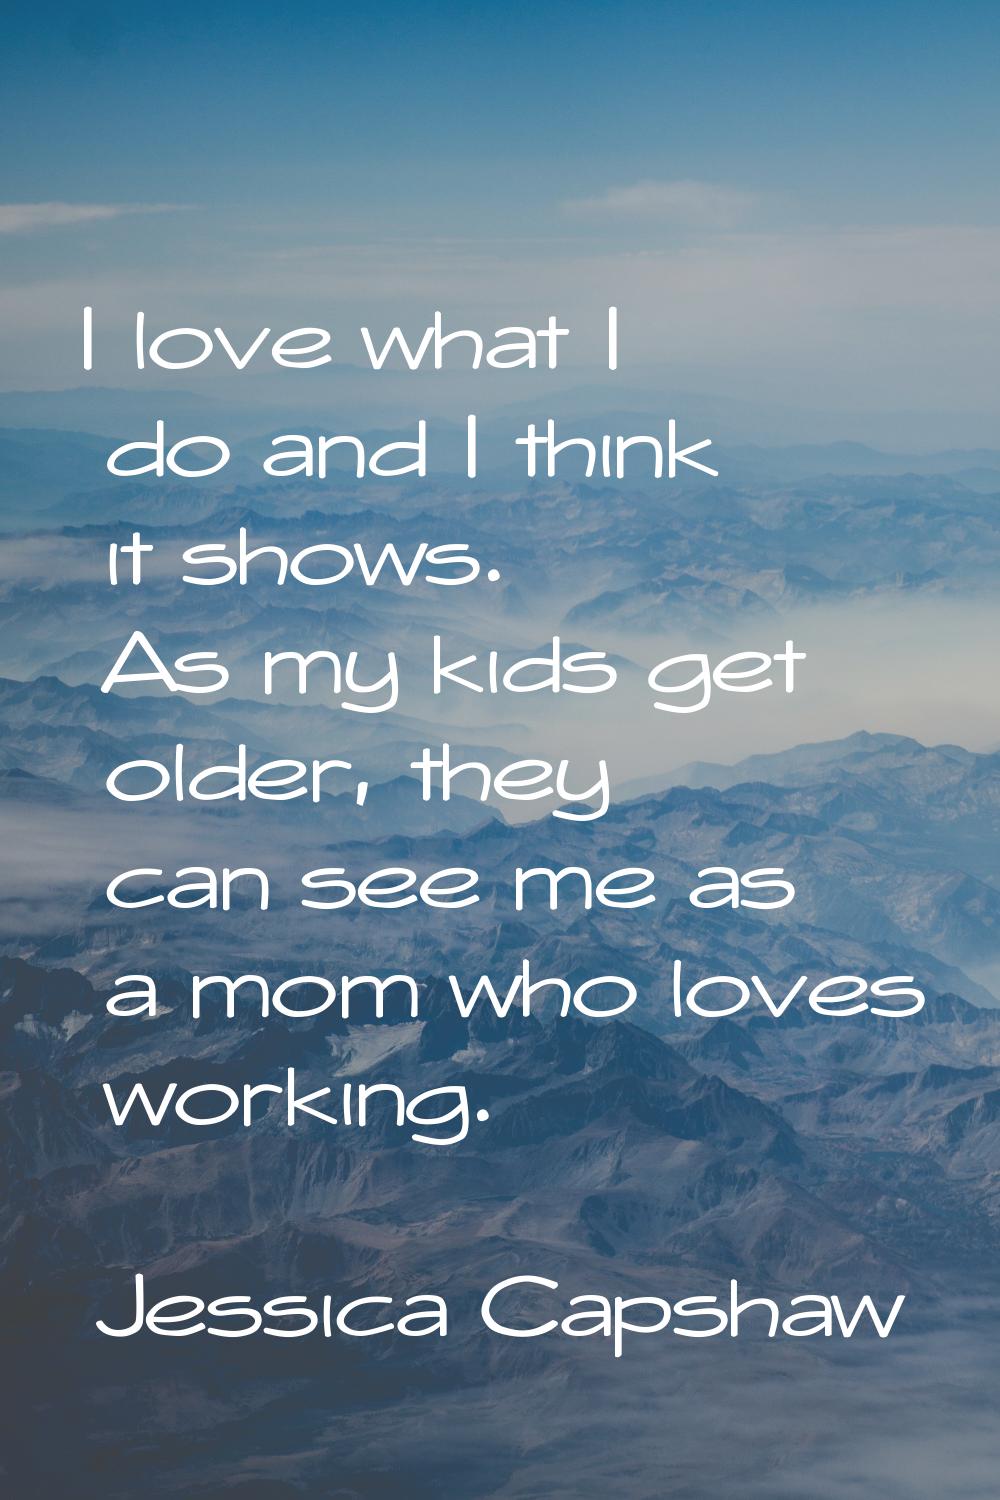 I love what I do and I think it shows. As my kids get older, they can see me as a mom who loves wor